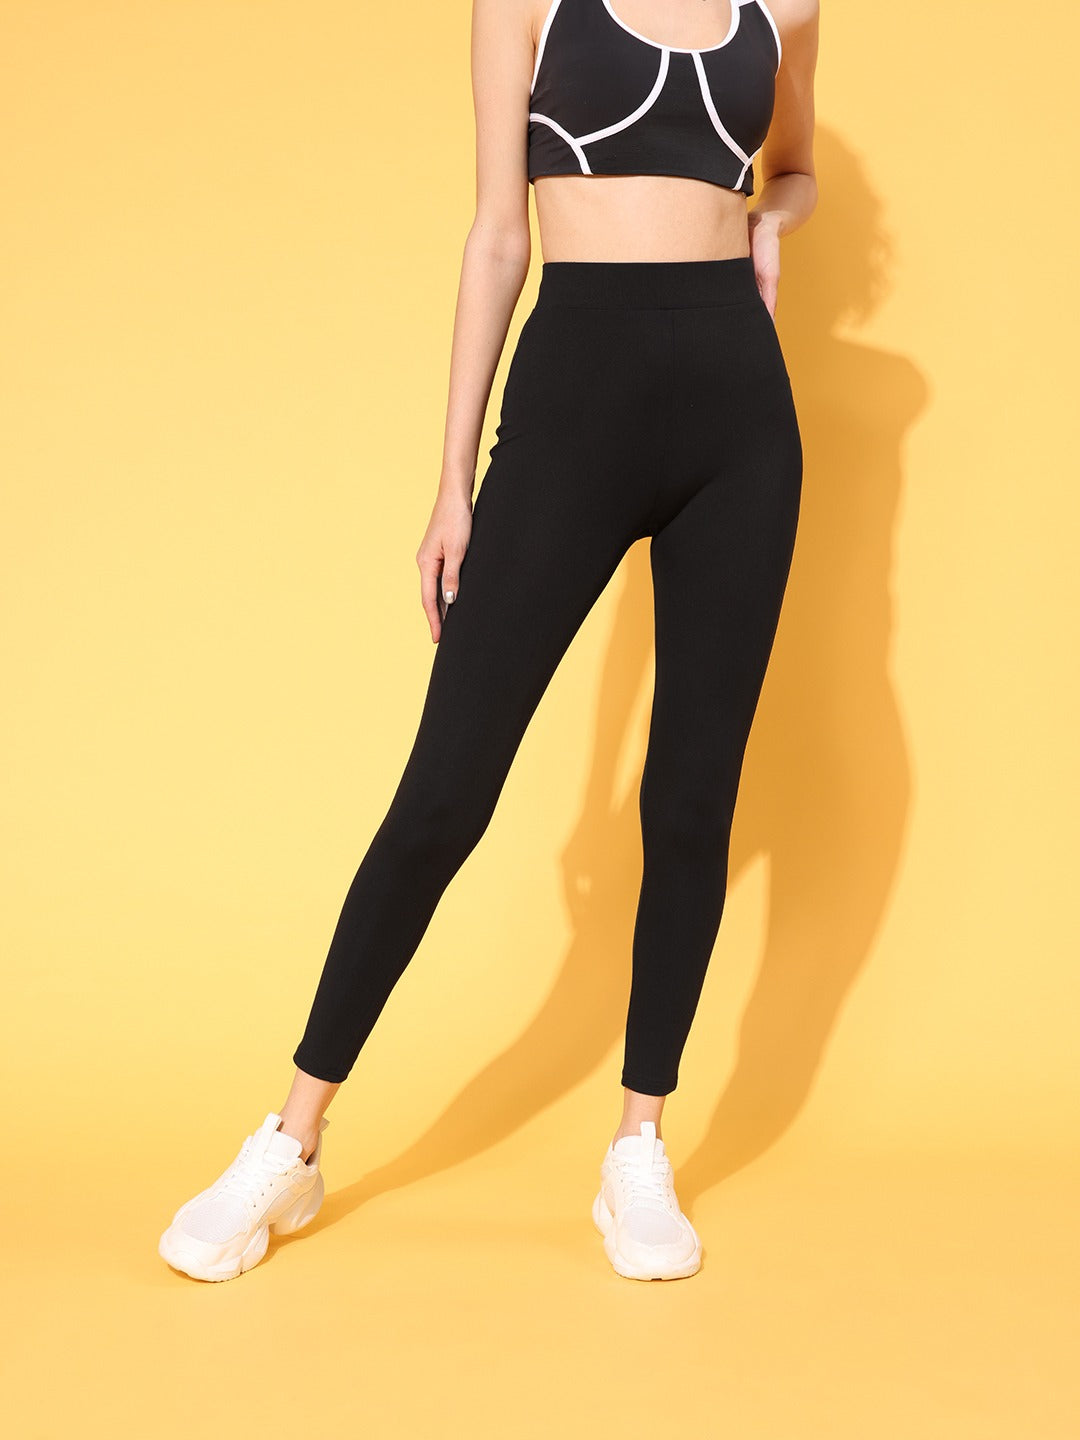 Four Way Lycra Sports Wear Ladies Gym Tights at Rs 200 in New